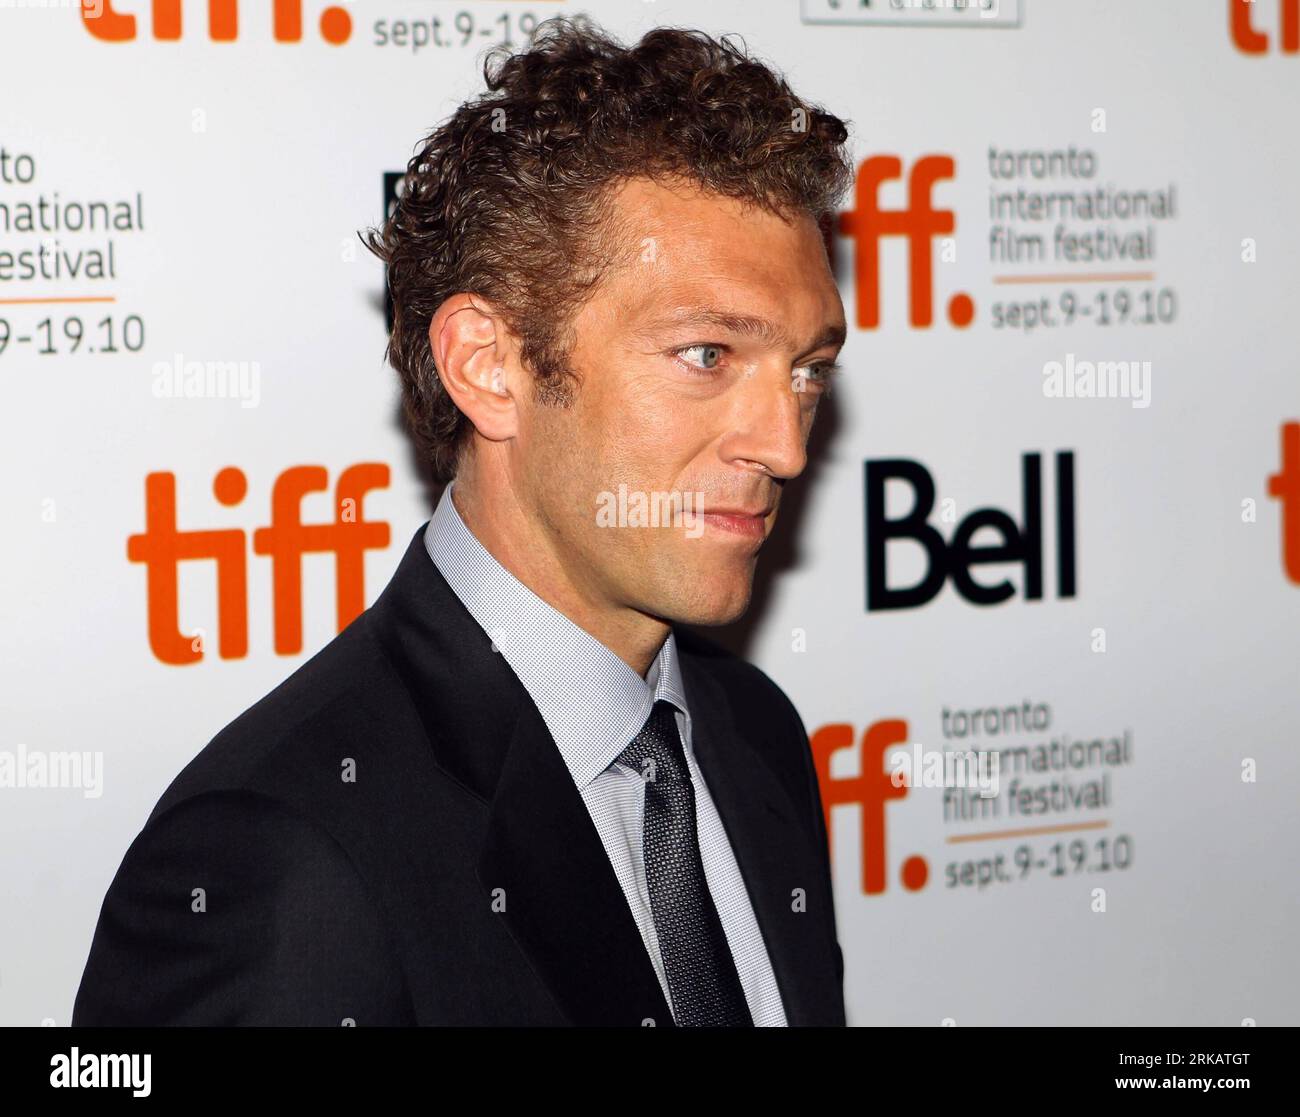 Bildnummer: 54427789  Datum: 13.09.2010  Copyright: imago/Xinhua (100914) -- TORONTO, Sept. 14, 2010 (Xinhua) -- Actor Vincent Cassel poses for photos before the screening of the film Ceremony at the Isabel Bader Theater during the 35th Toronto International Film Festival in Toronto, Canada, Sept. 13, 2010. (Xinhua/Zou Zheng) CANADA-TORONTO-FILM FESTIVAL- BLACK SWAN PUBLICATIONxNOTxINxCHN Kultur Entertainment People Film Festival Filmfestival Porträt kbdig xub 2010 quer premiumd xint     Bildnummer 54427789 Date 13 09 2010 Copyright Imago XINHUA  Toronto Sept 14 2010 XINHUA Actor Vincent Casse Stock Photo